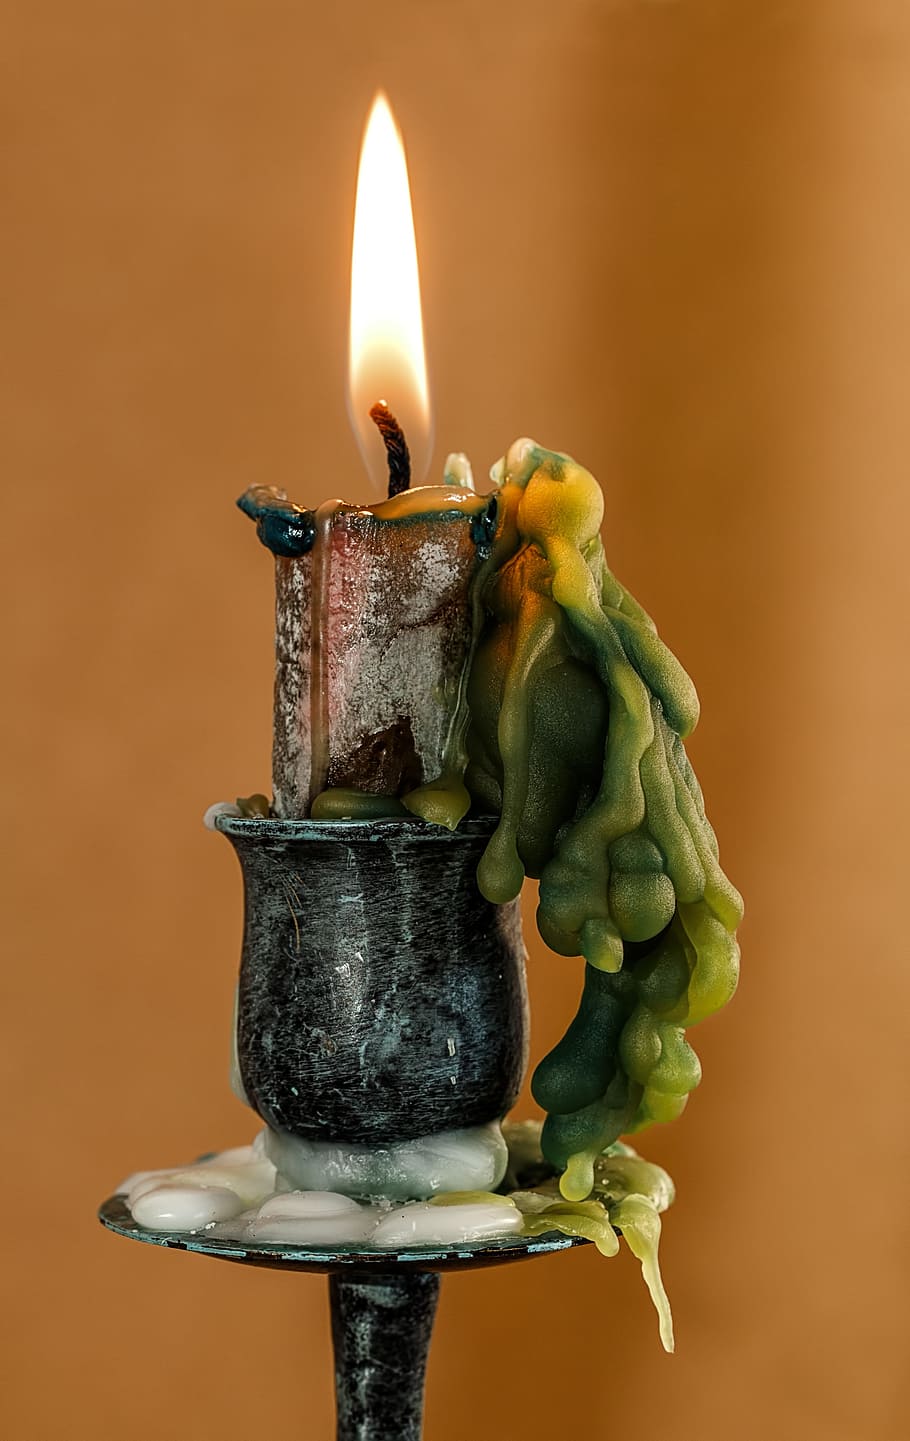 candle, metal, stand, candle wax, candlelight, candlestick, flame, wax, illuminated, fire